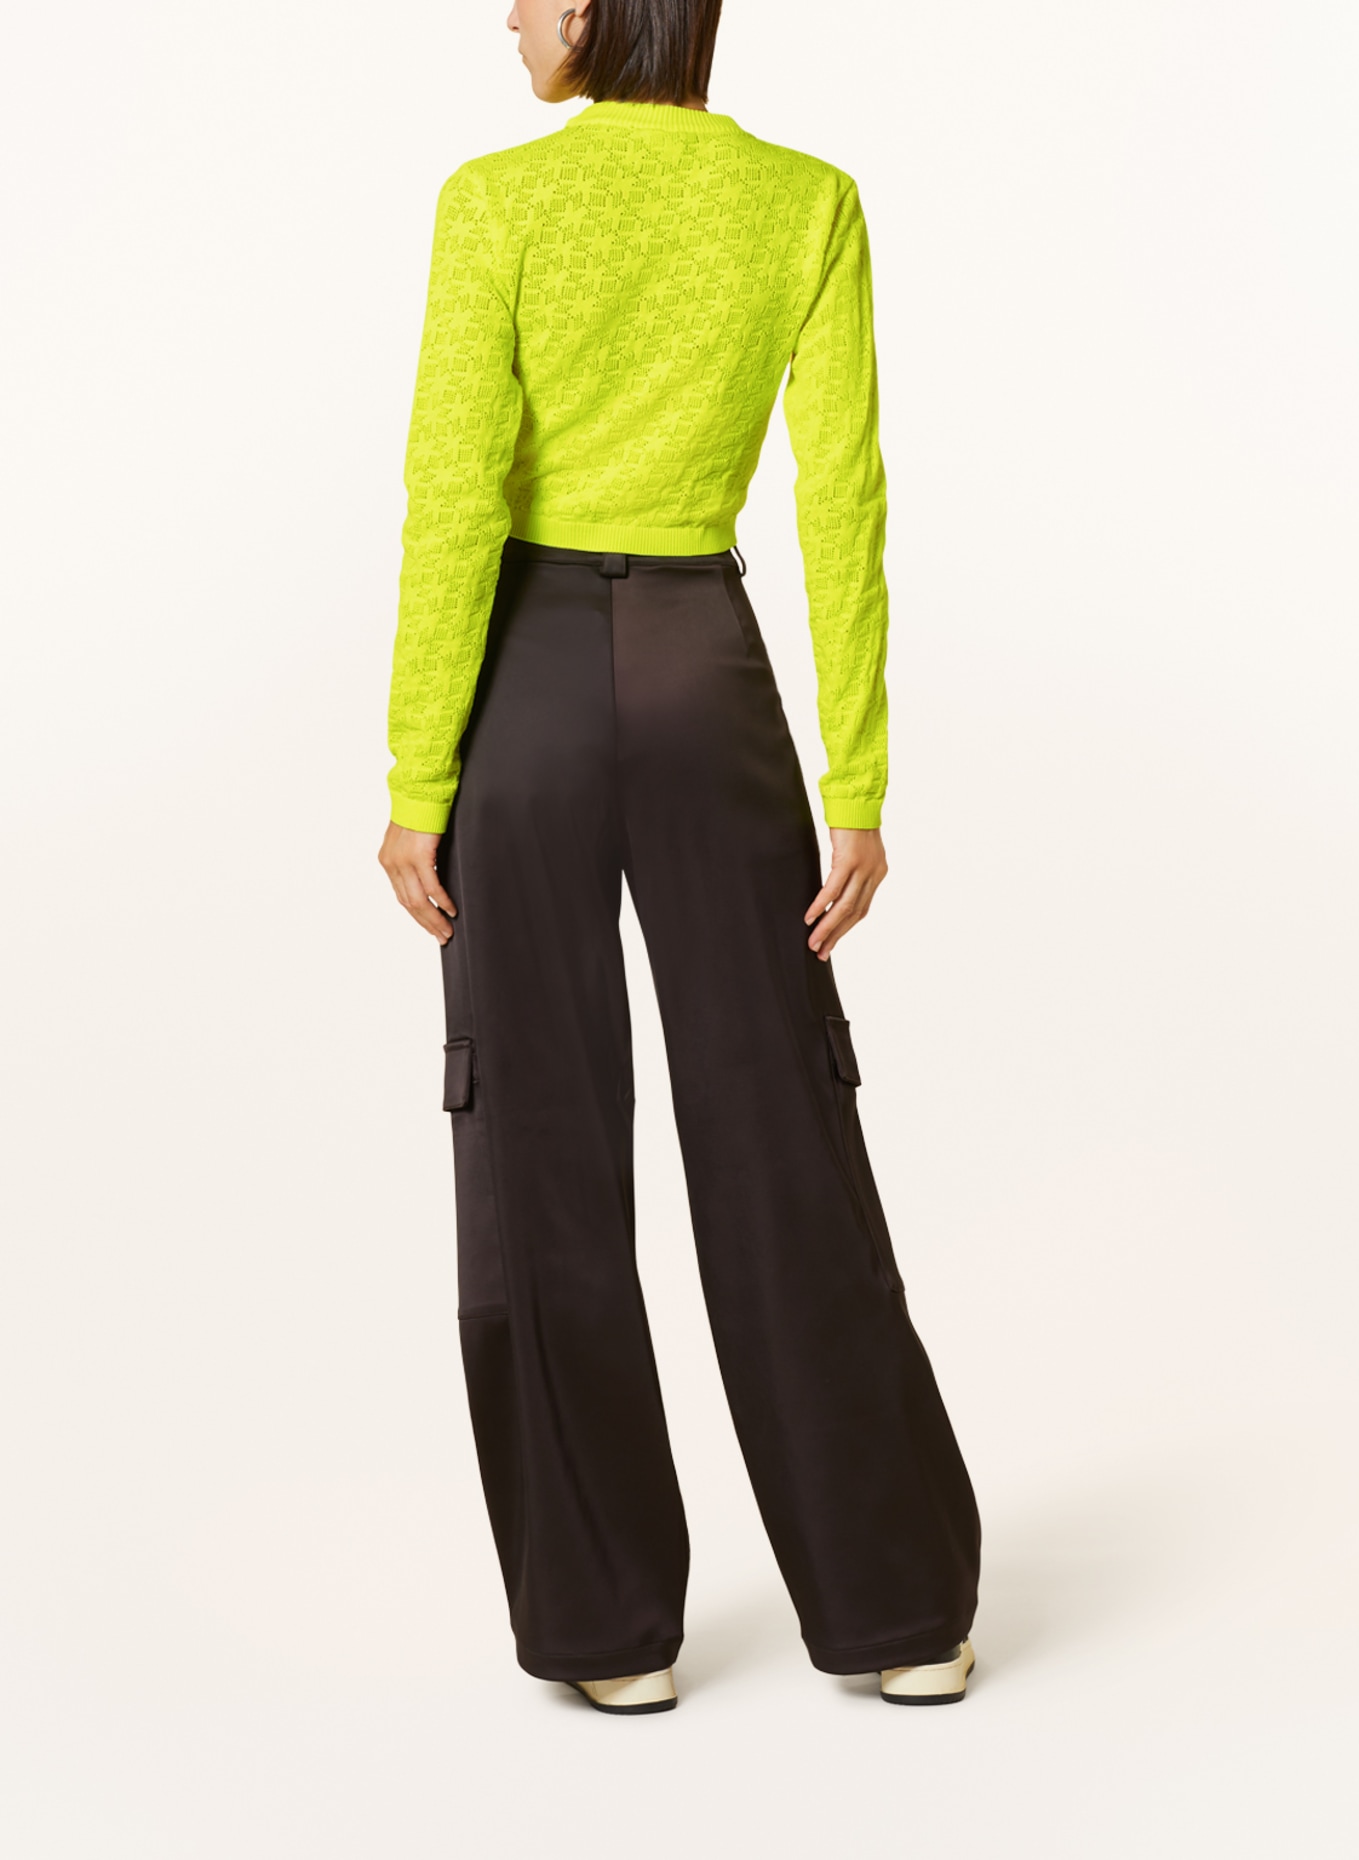 KARO KAUER Cropped sweater, Color: NEON YELLOW (Image 3)